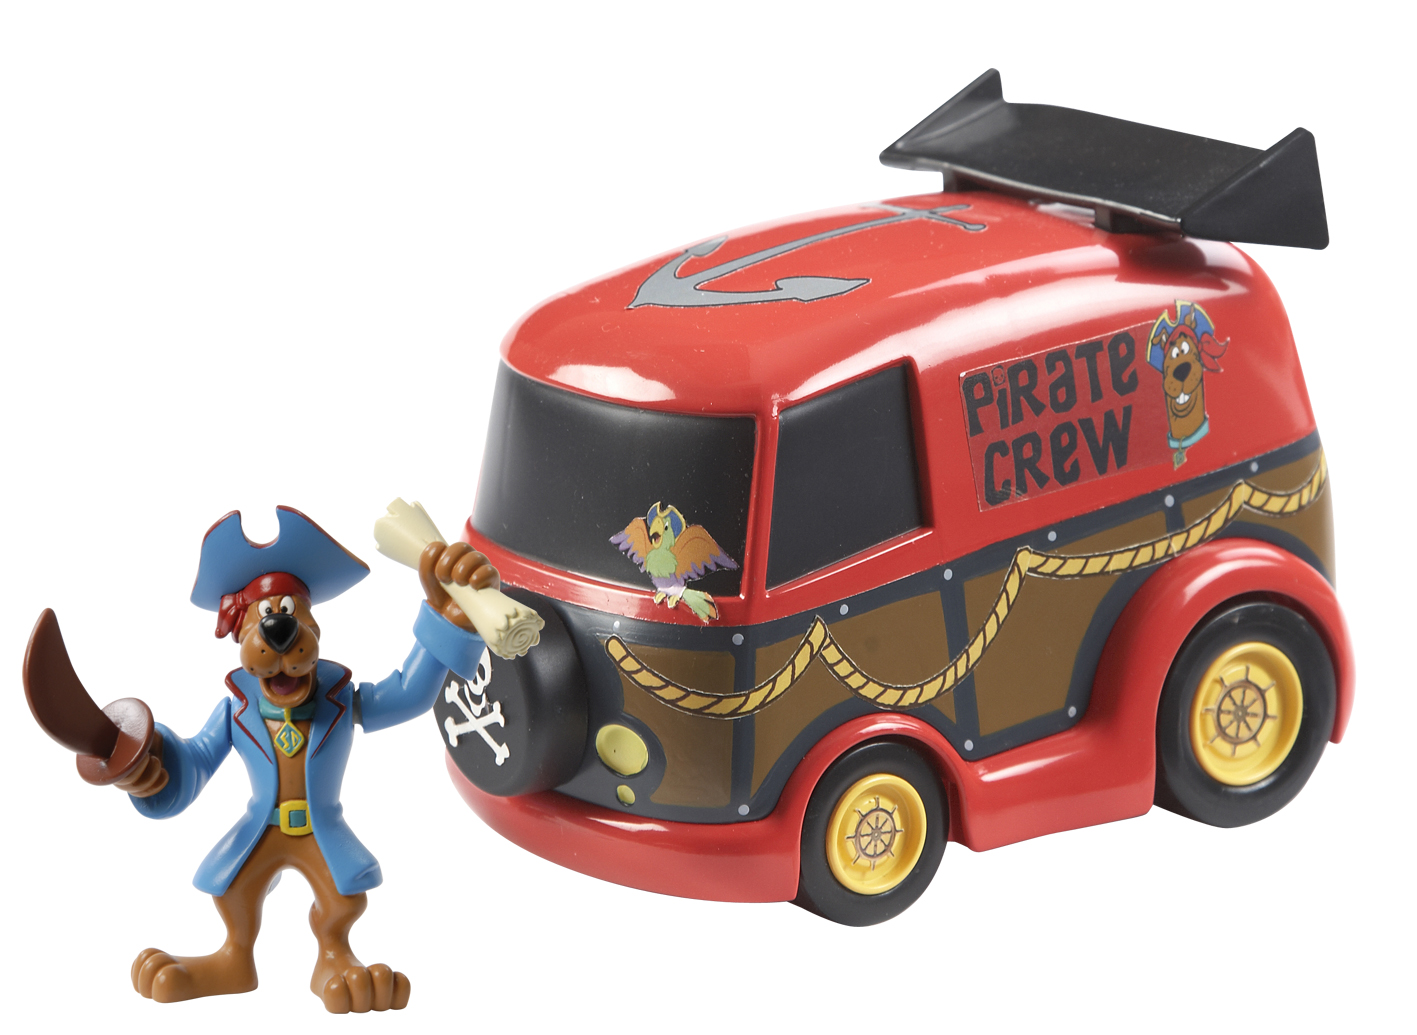 Pirate Vehicle and Figure